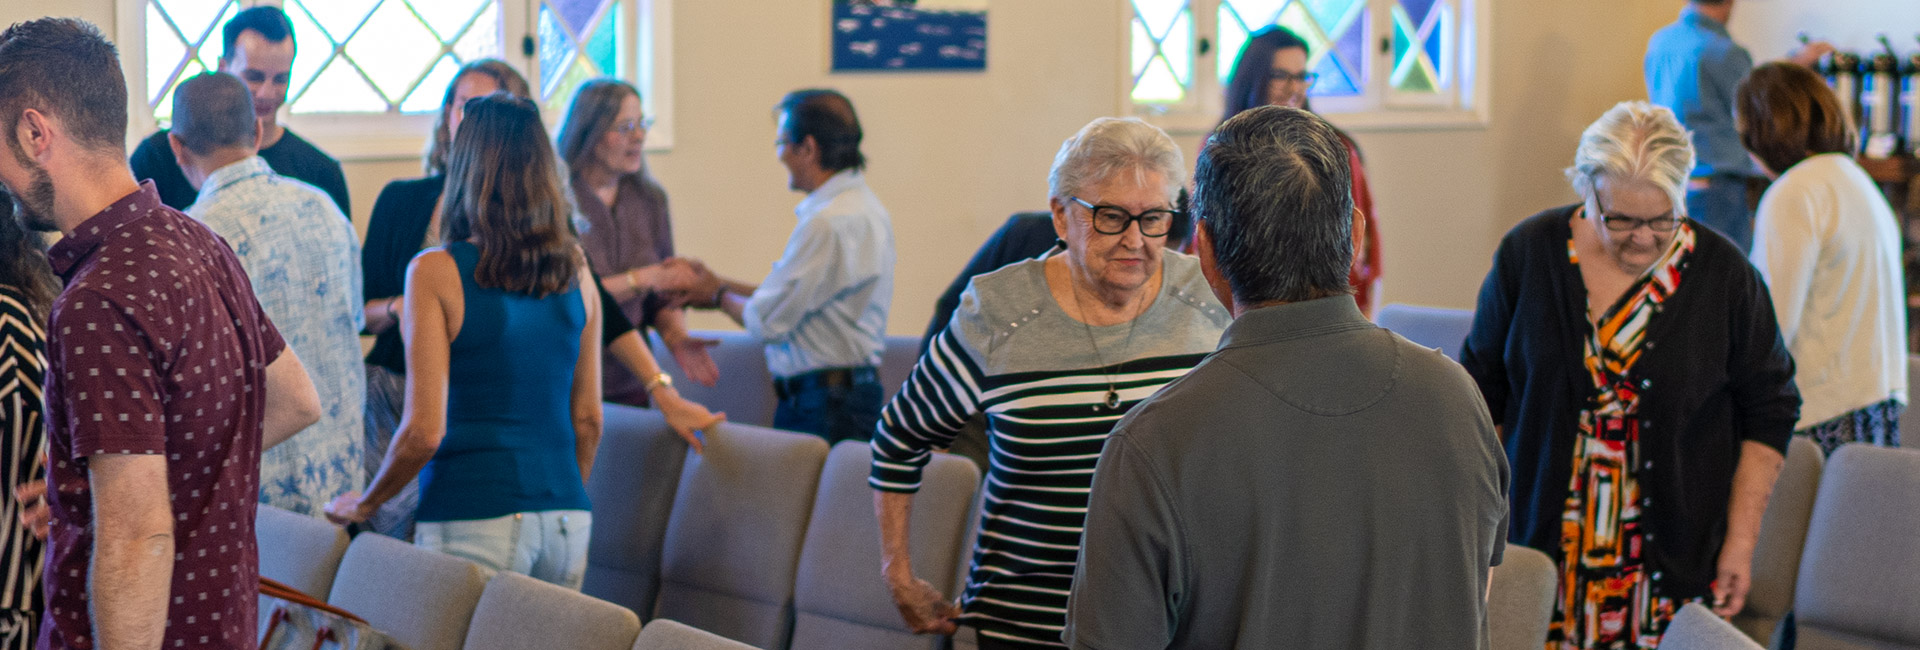 Church members during service greeting one another